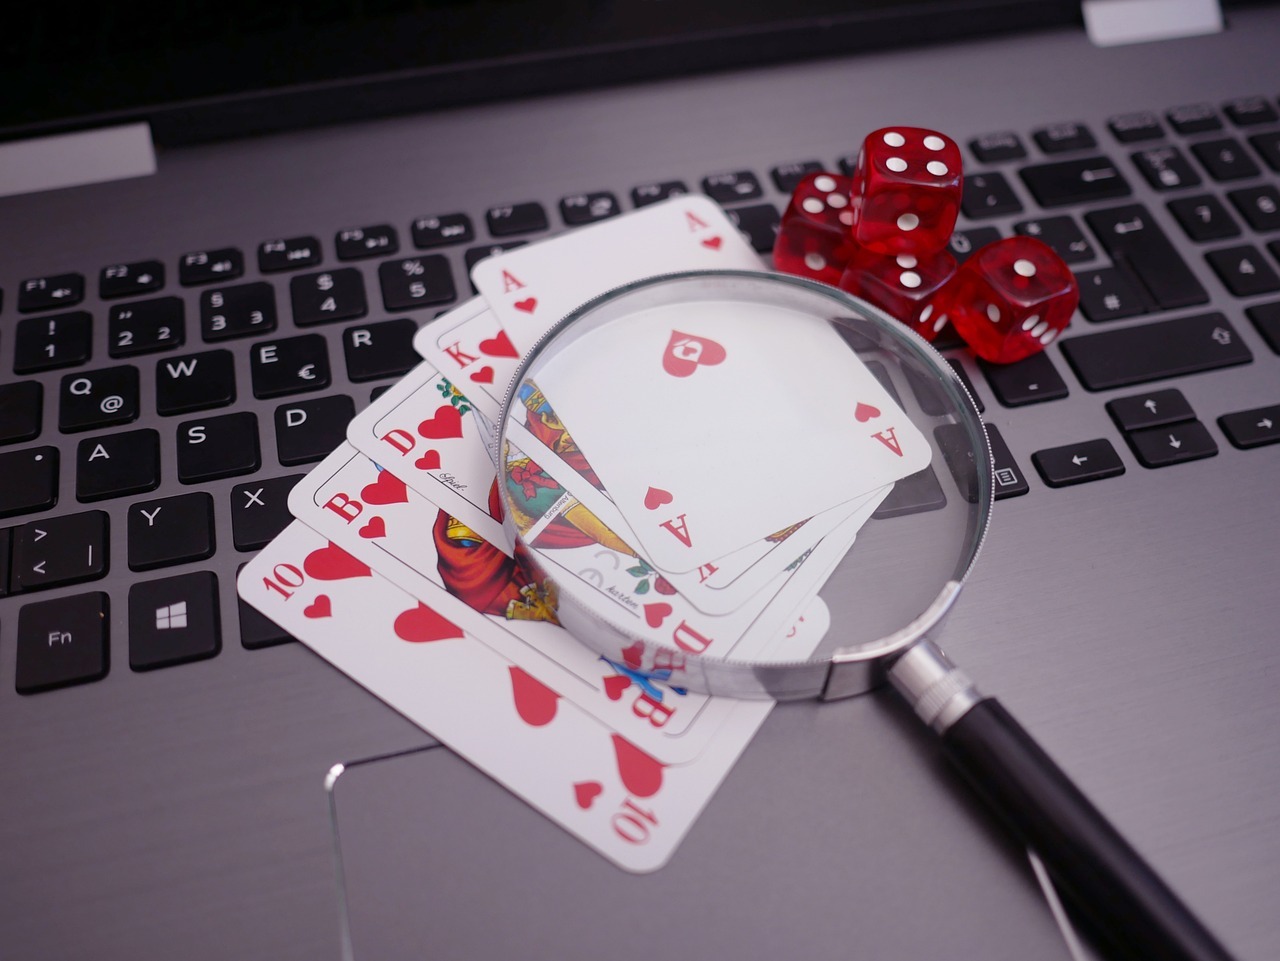 Safe And Secure: Ensuring A Trustworthy Online Gambling Experience